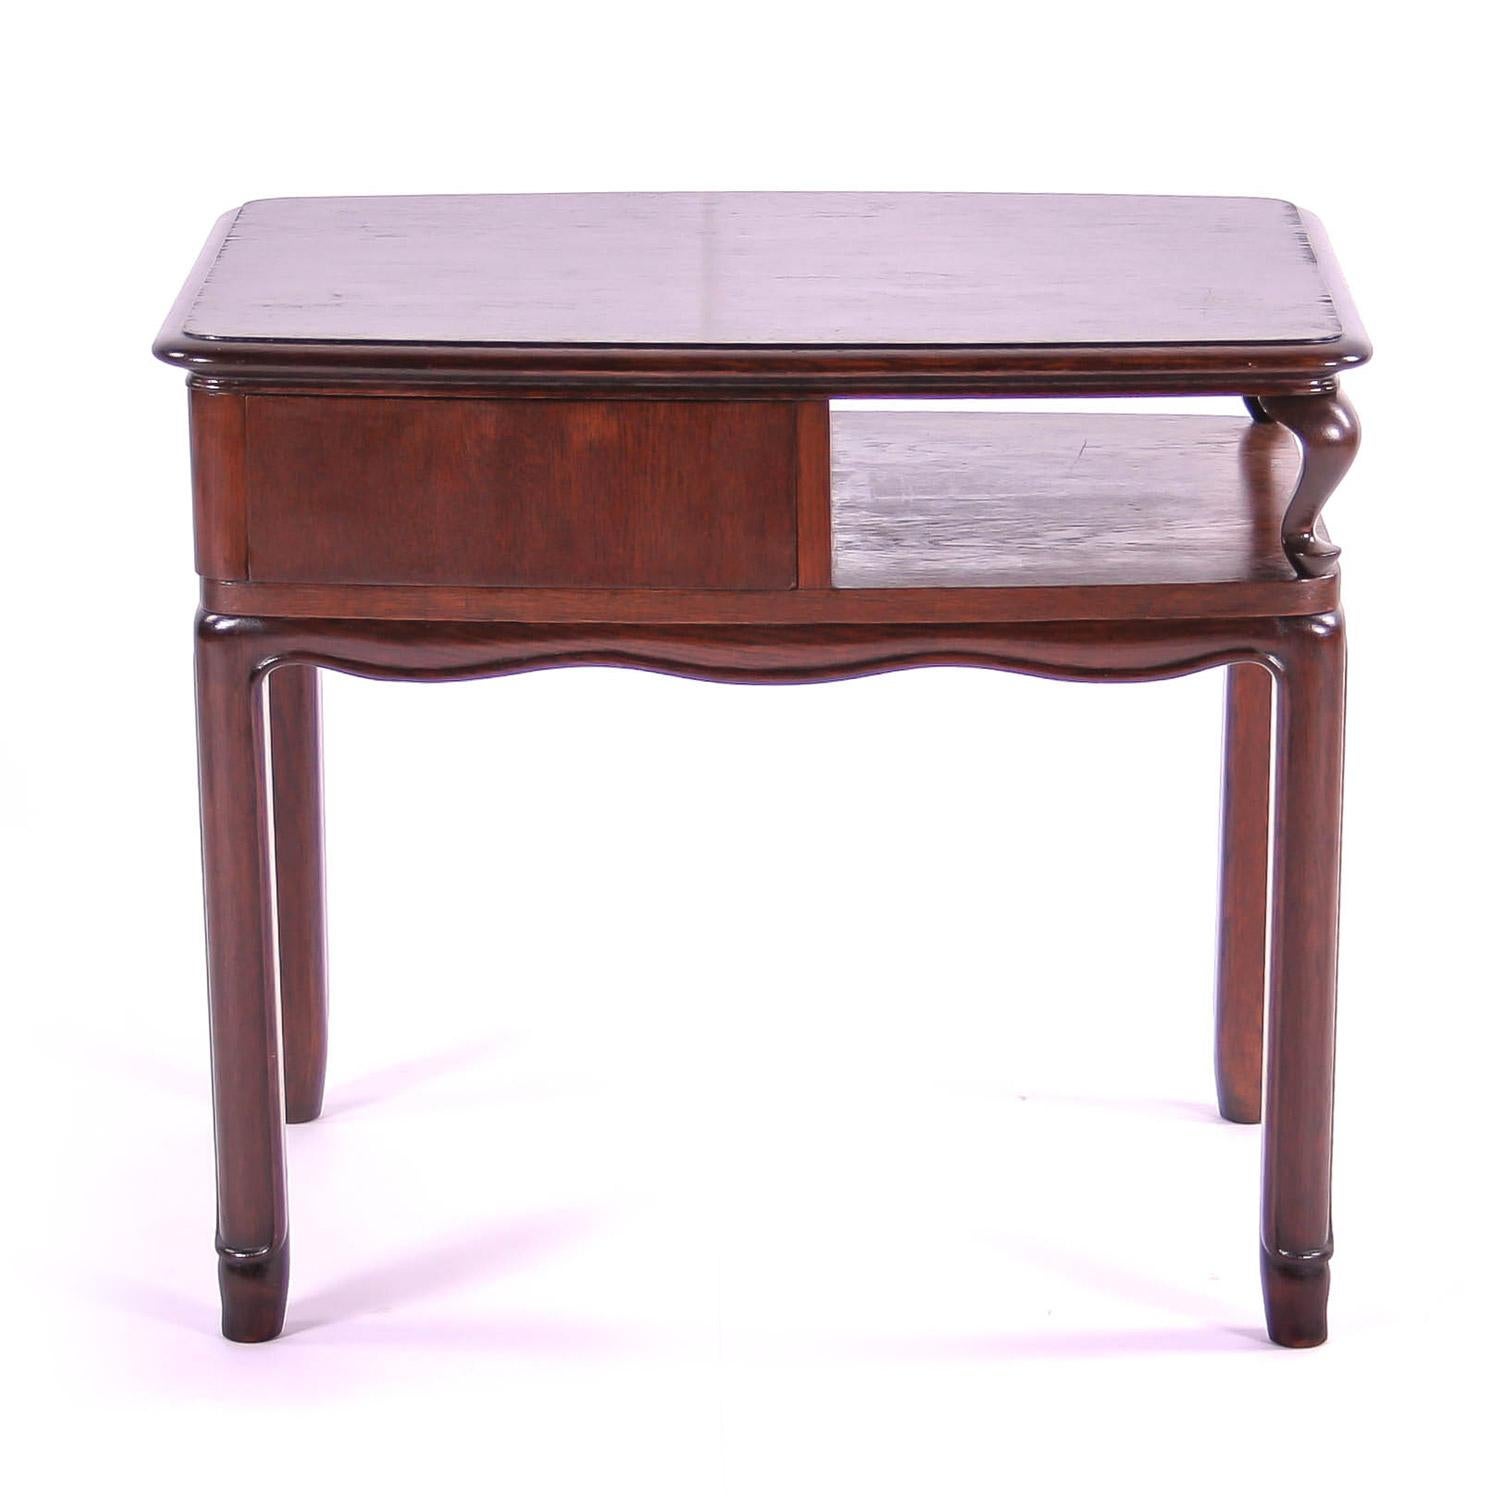 Wood Czech Historism Design Table with Storage and Drawer For Sale